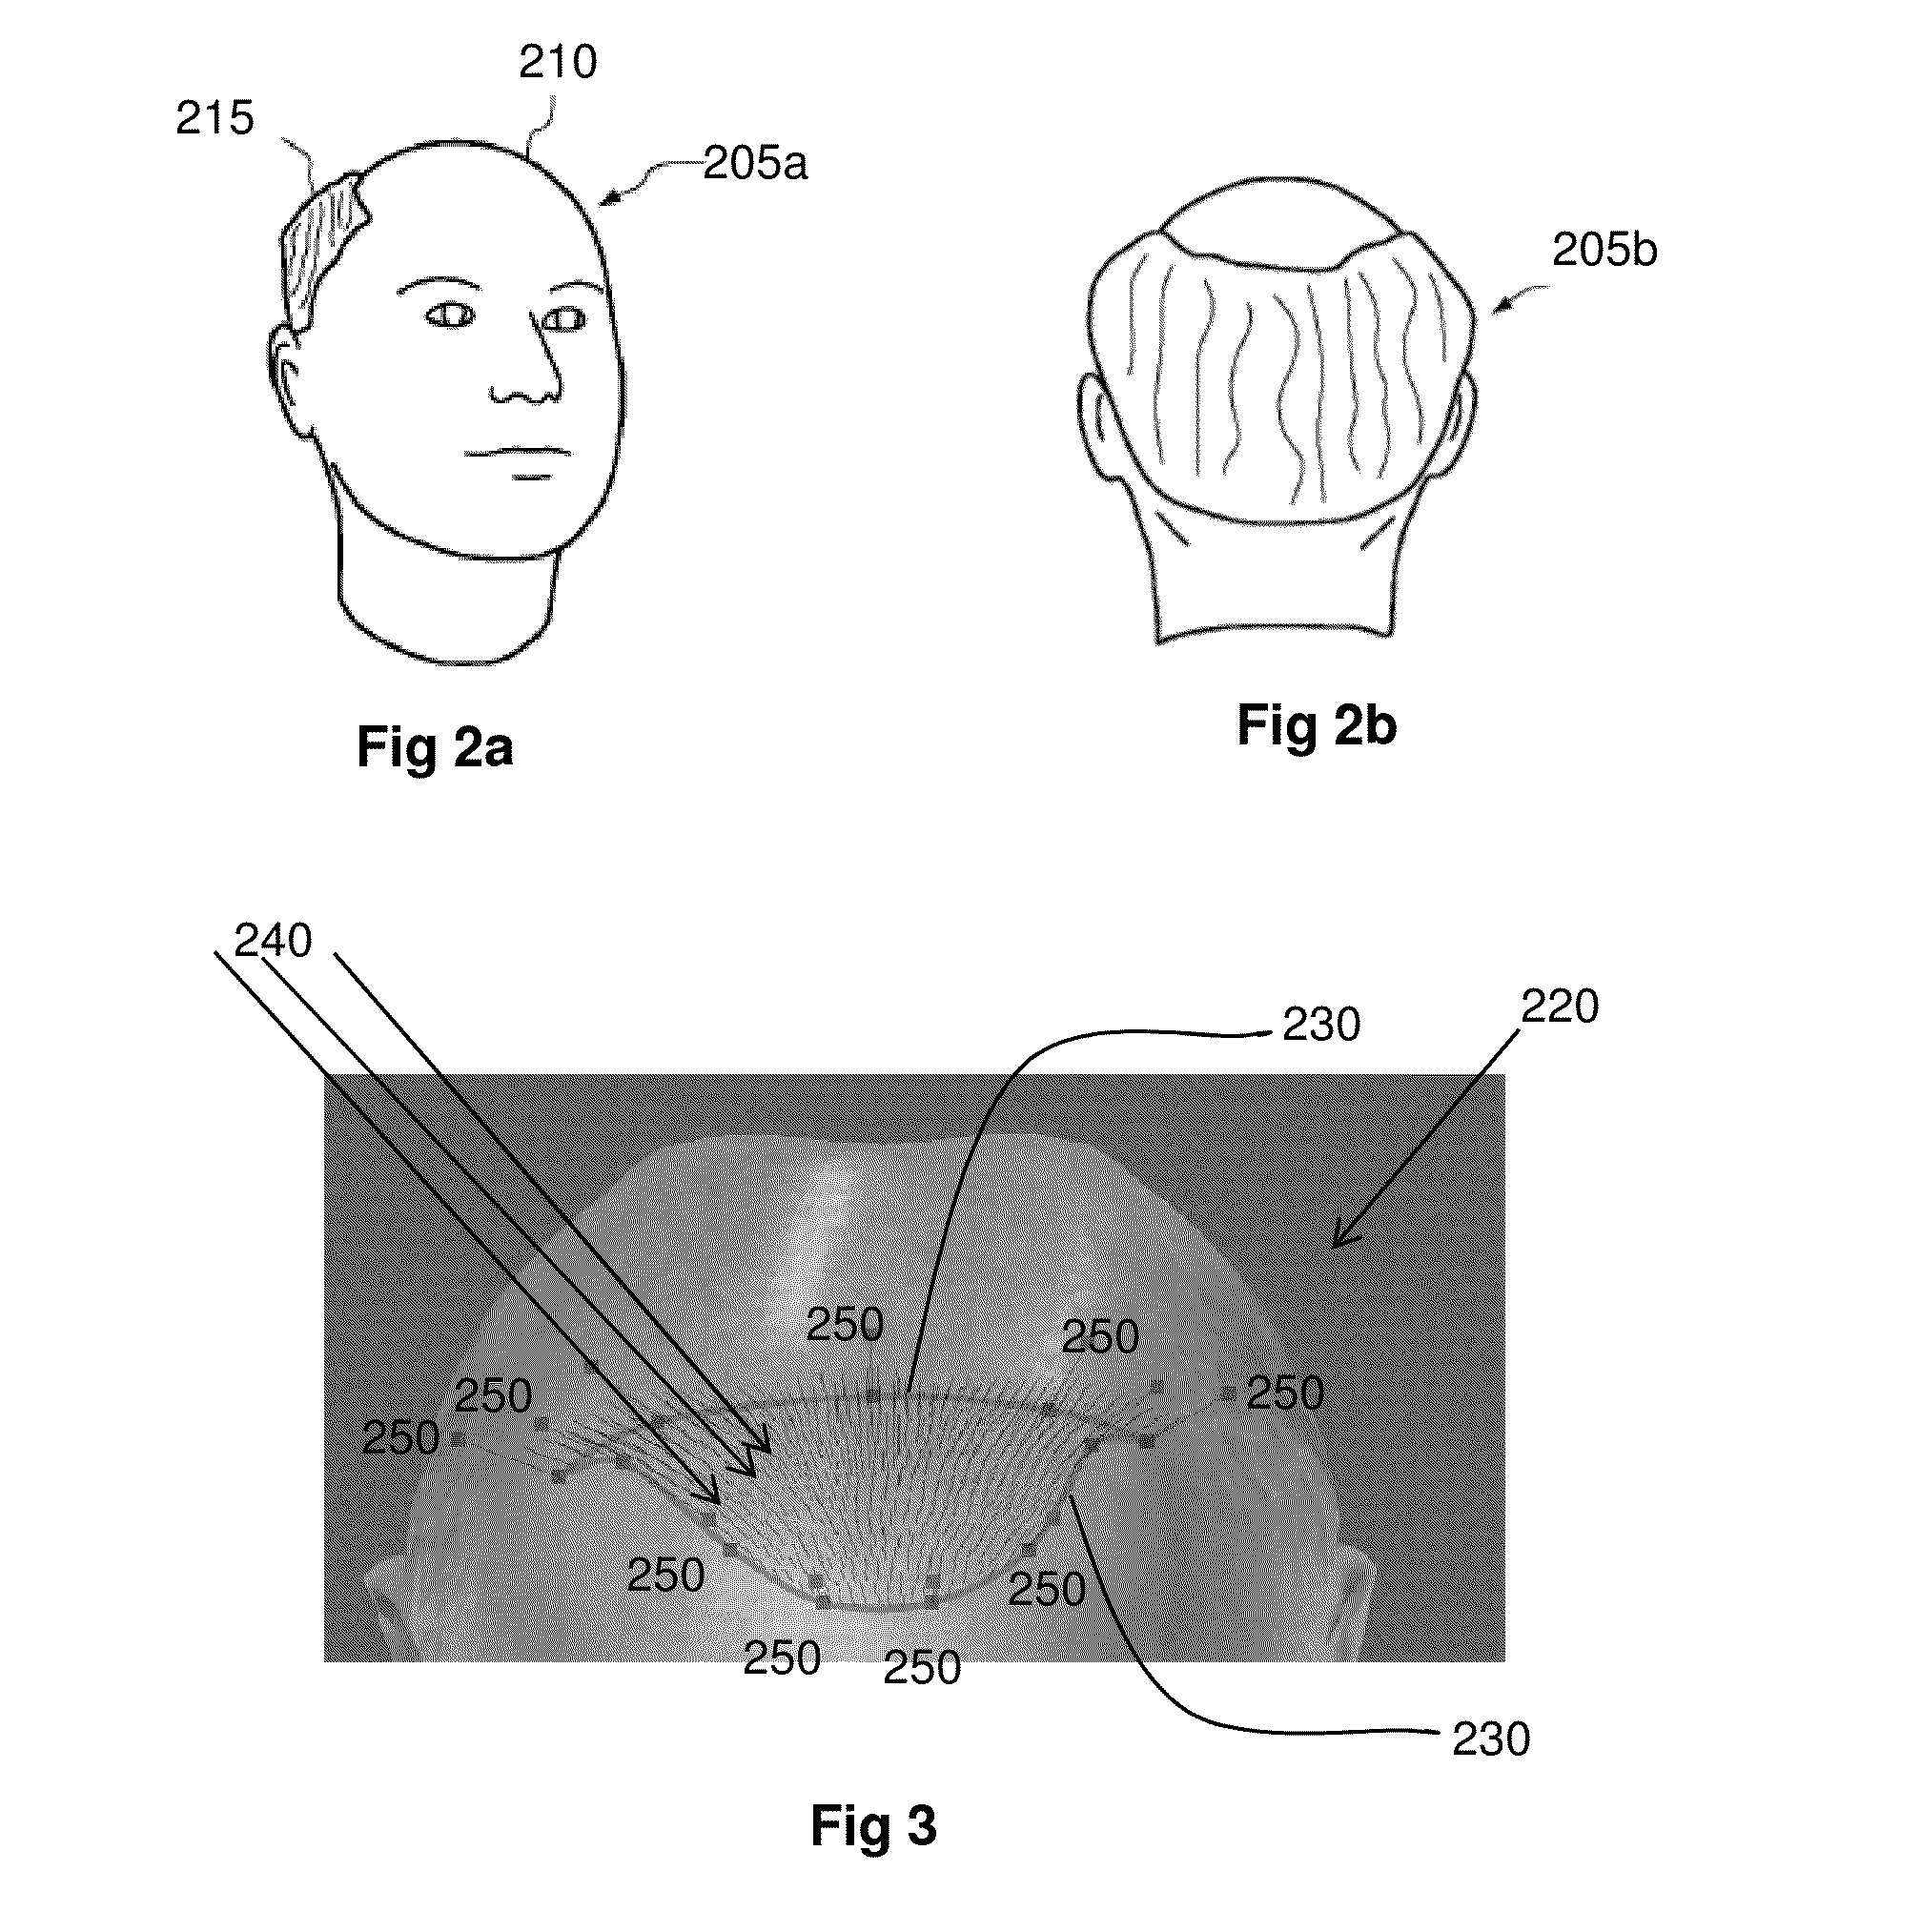 Systems and Methods for Planning Hair Transplantation